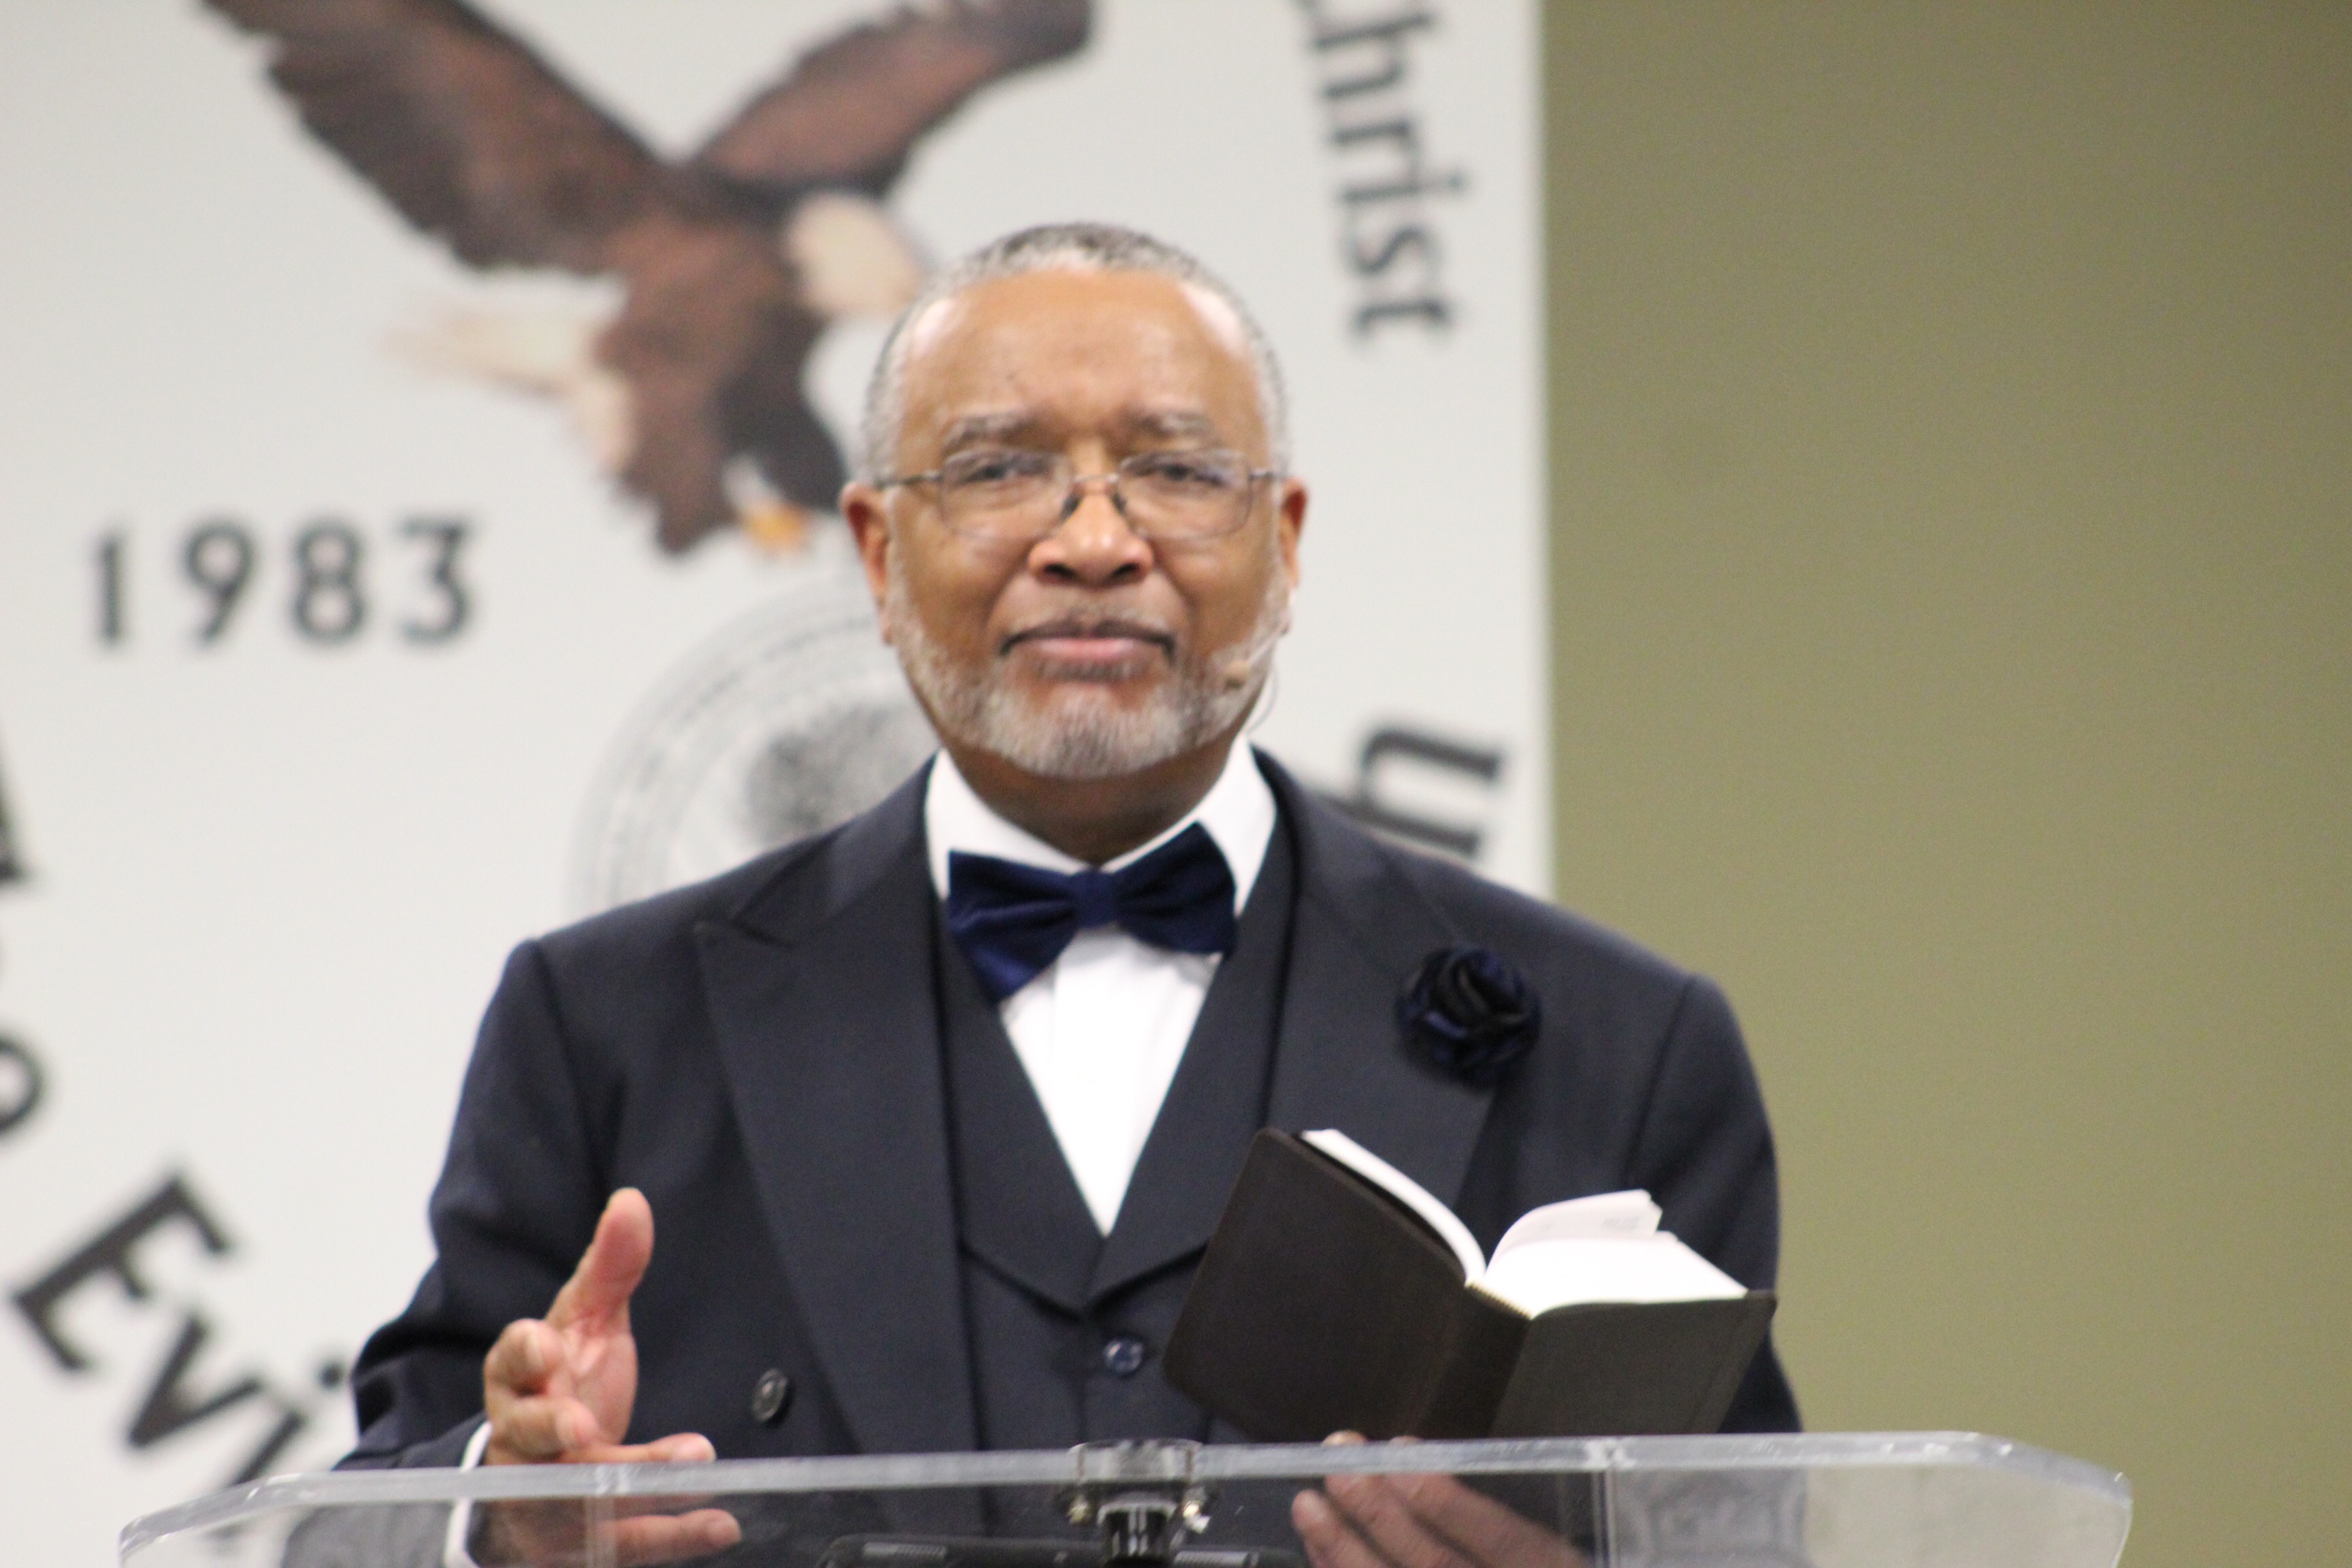 Dr. Gary L. Cordon, Sr. preaching holding Bible in left hand in front of logo in pulpit.